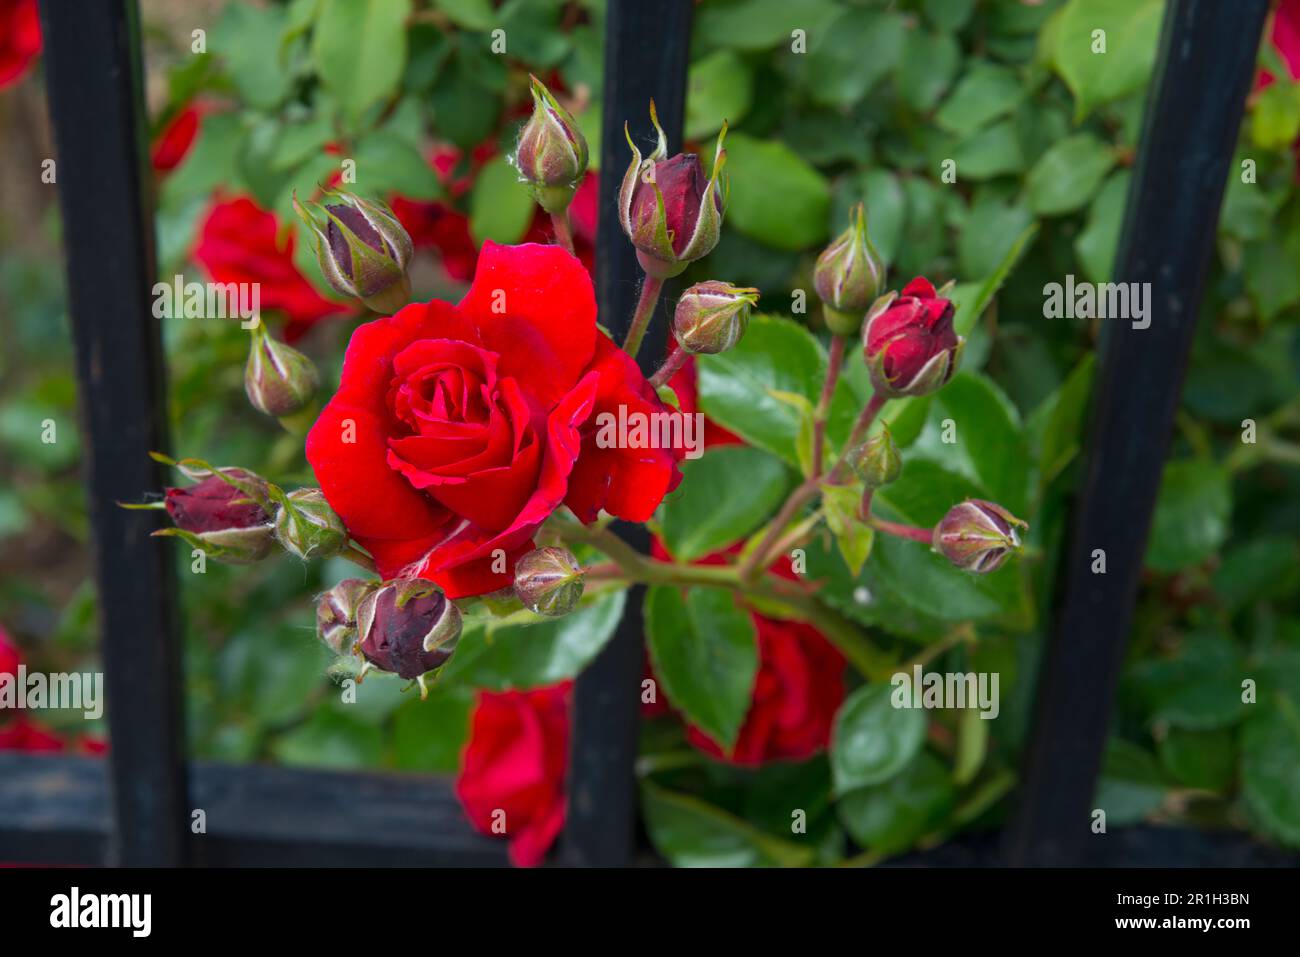 Red rose with buds. Stock Photo